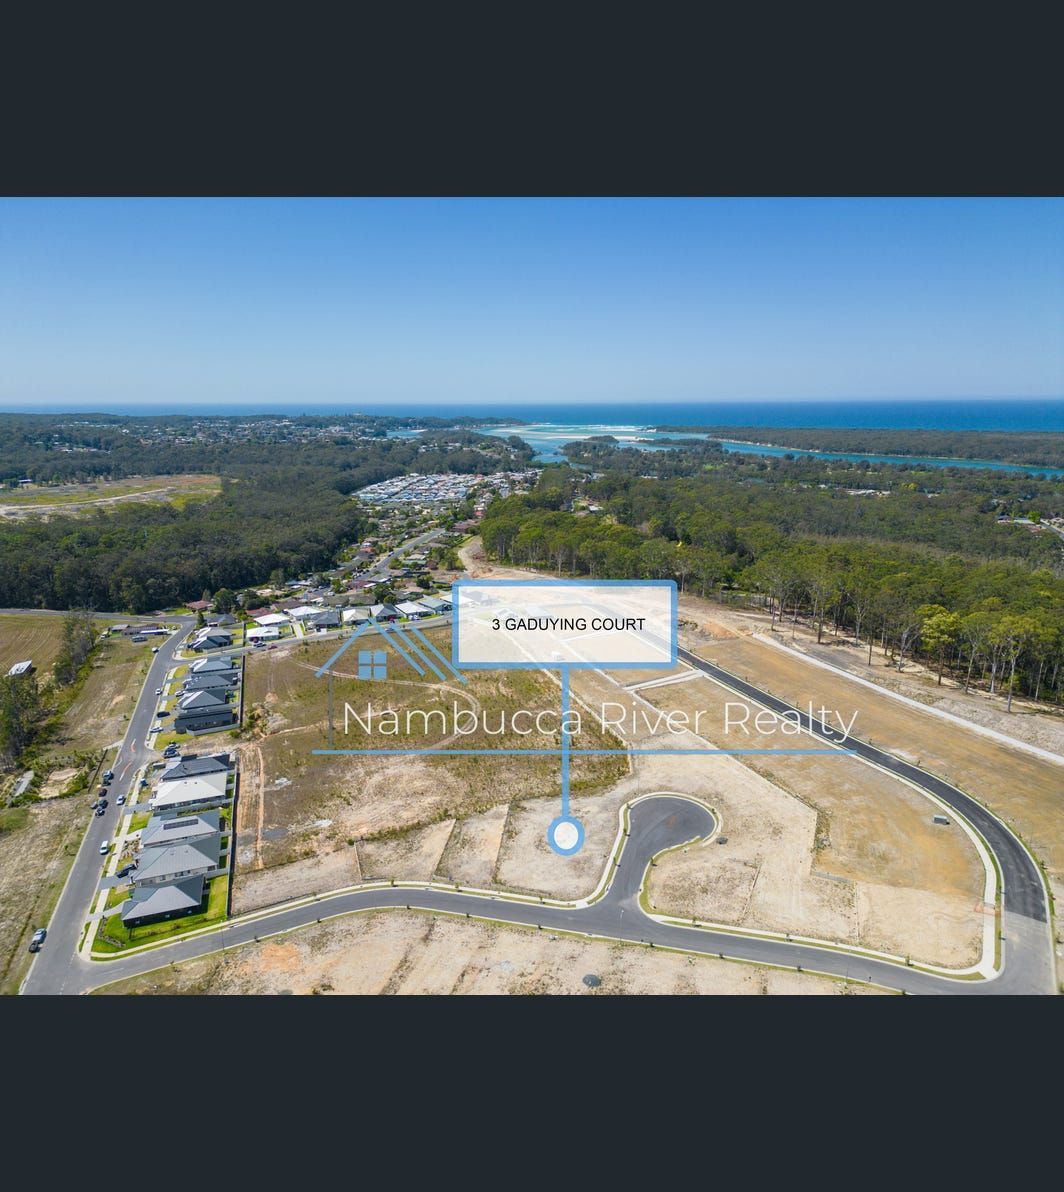 Land for sale - 3 Gaduying Court, Nambucca Heads, NSW 2448 by Nambucca River Realty